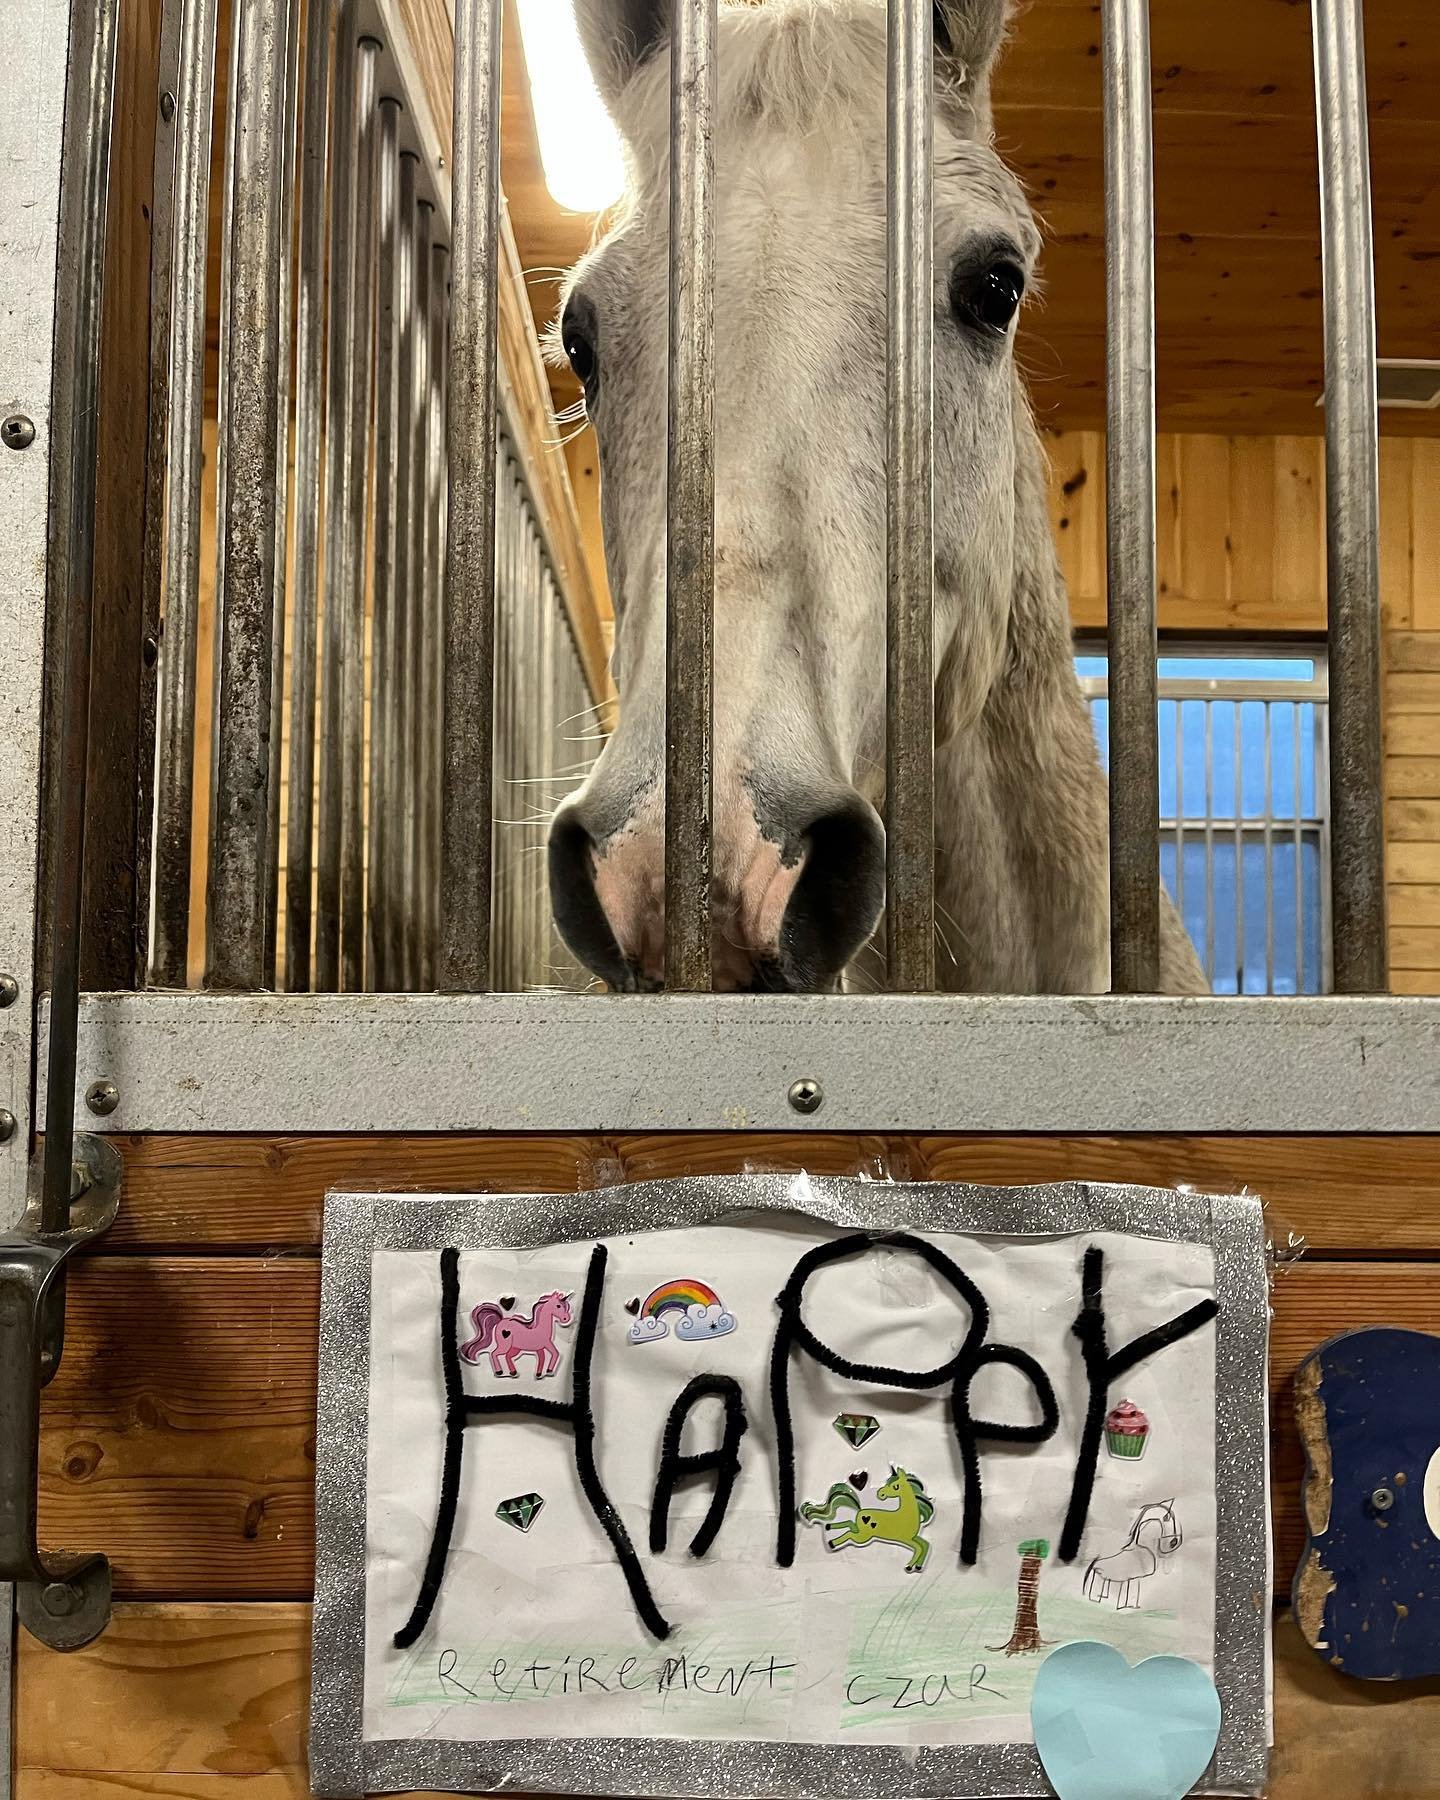 Today we said farewell to our wonderful therapy horse, Czar, as he travels to New Brunswick for a well-earned retirement with his mom, Krystina. We are so grateful to Krystina for sharing Czar with us. Czar has been a part of our program since 2021 a